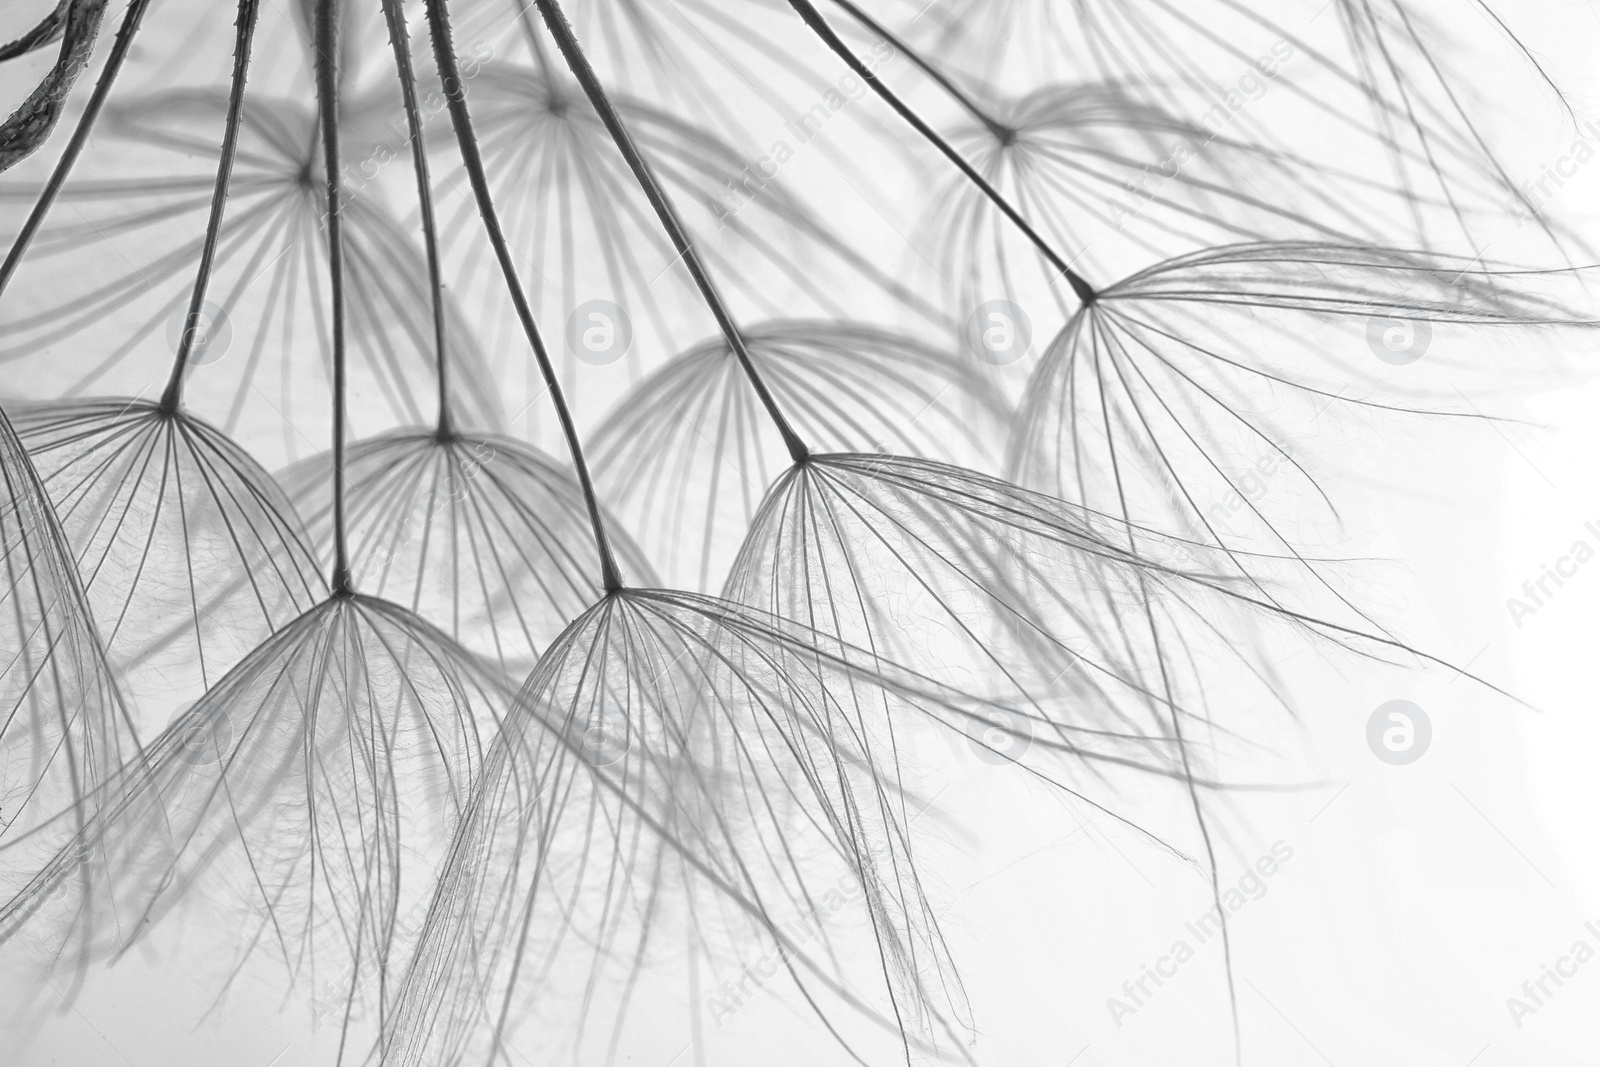 Image of Delicate dandelion seeds, closeup. Black and white tone